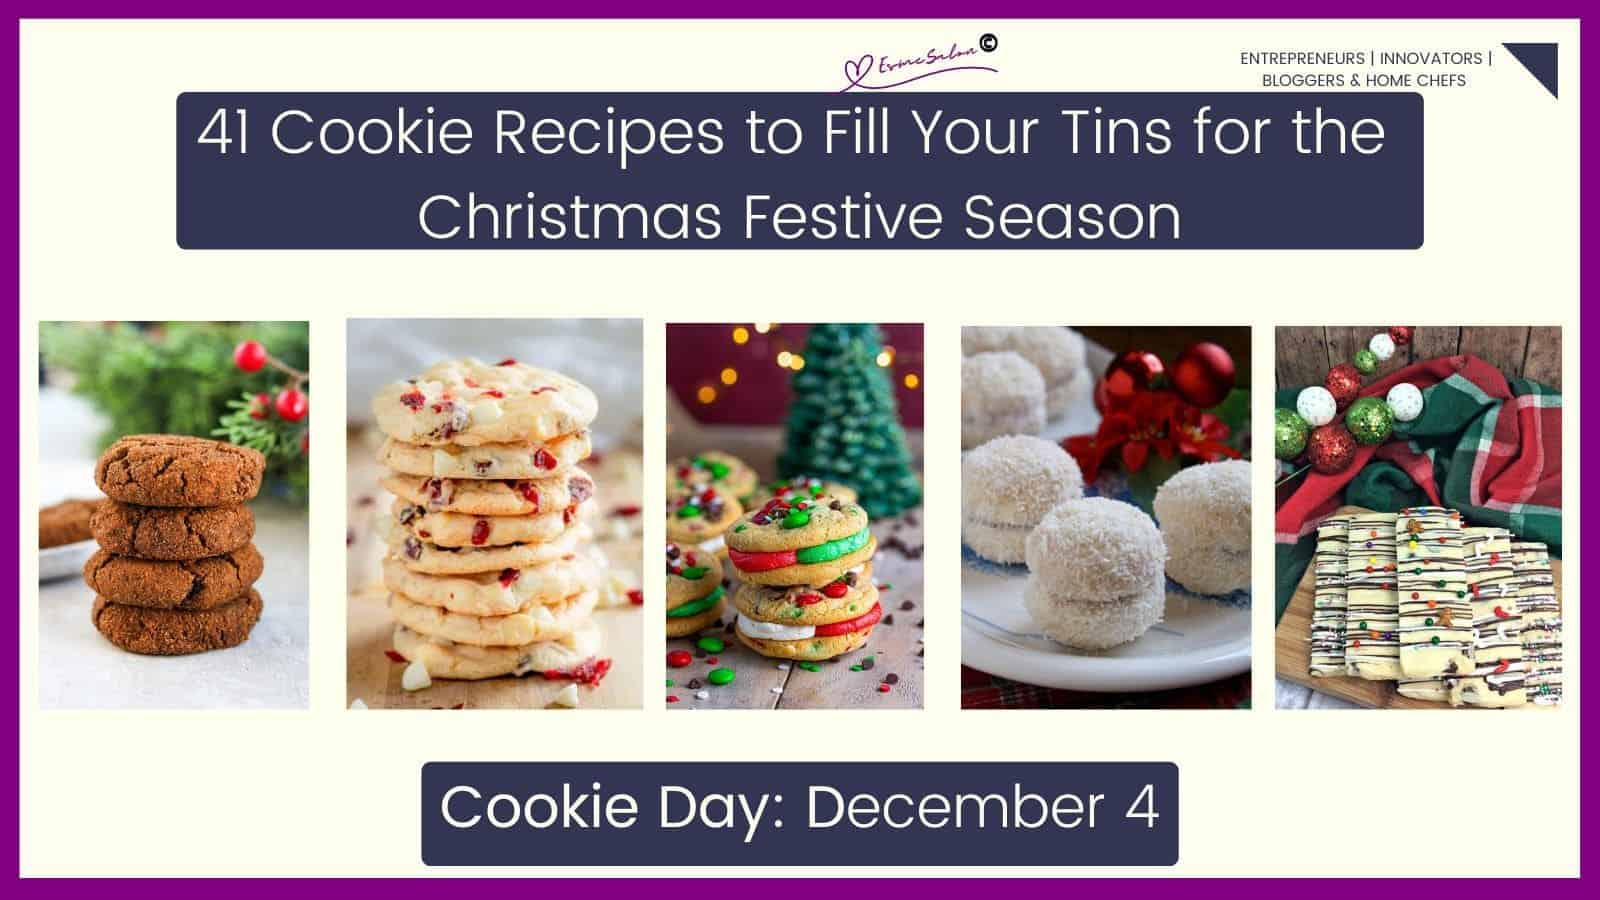 41 Cookie Recipes to Fill Your Tins